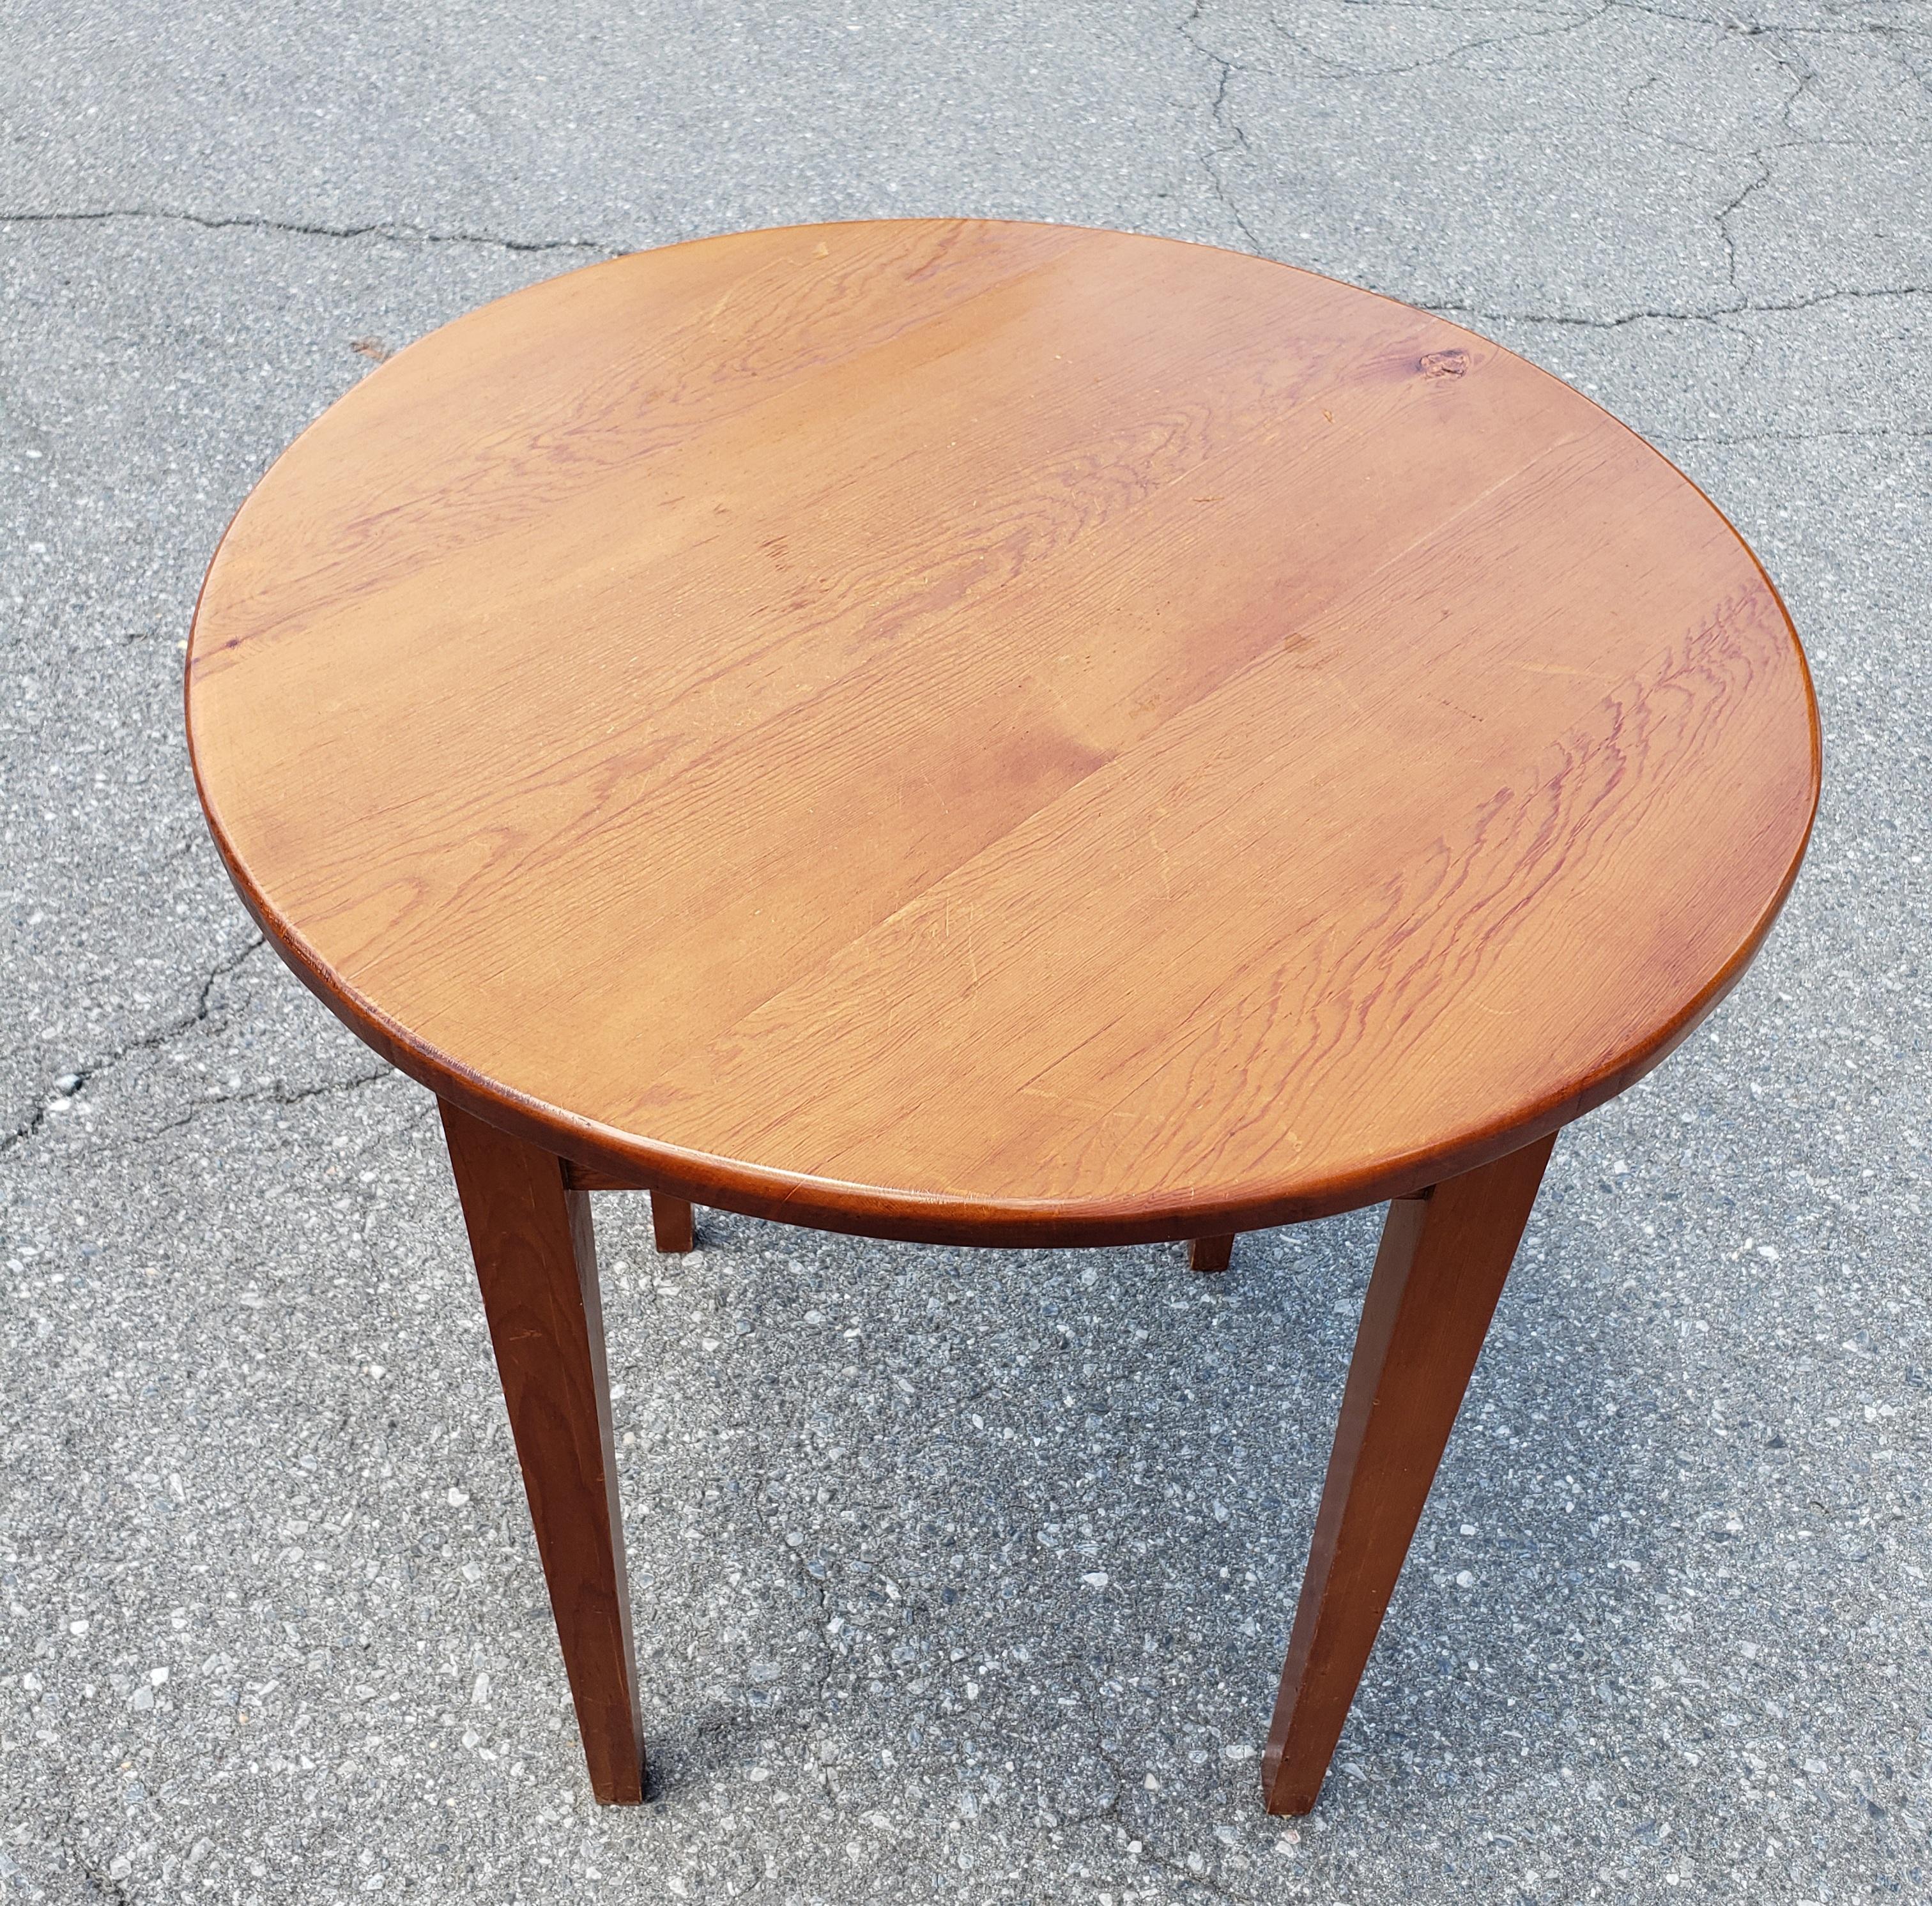 Amish Hand-Crafted Pine Round Lamp Table In Good Condition For Sale In Germantown, MD